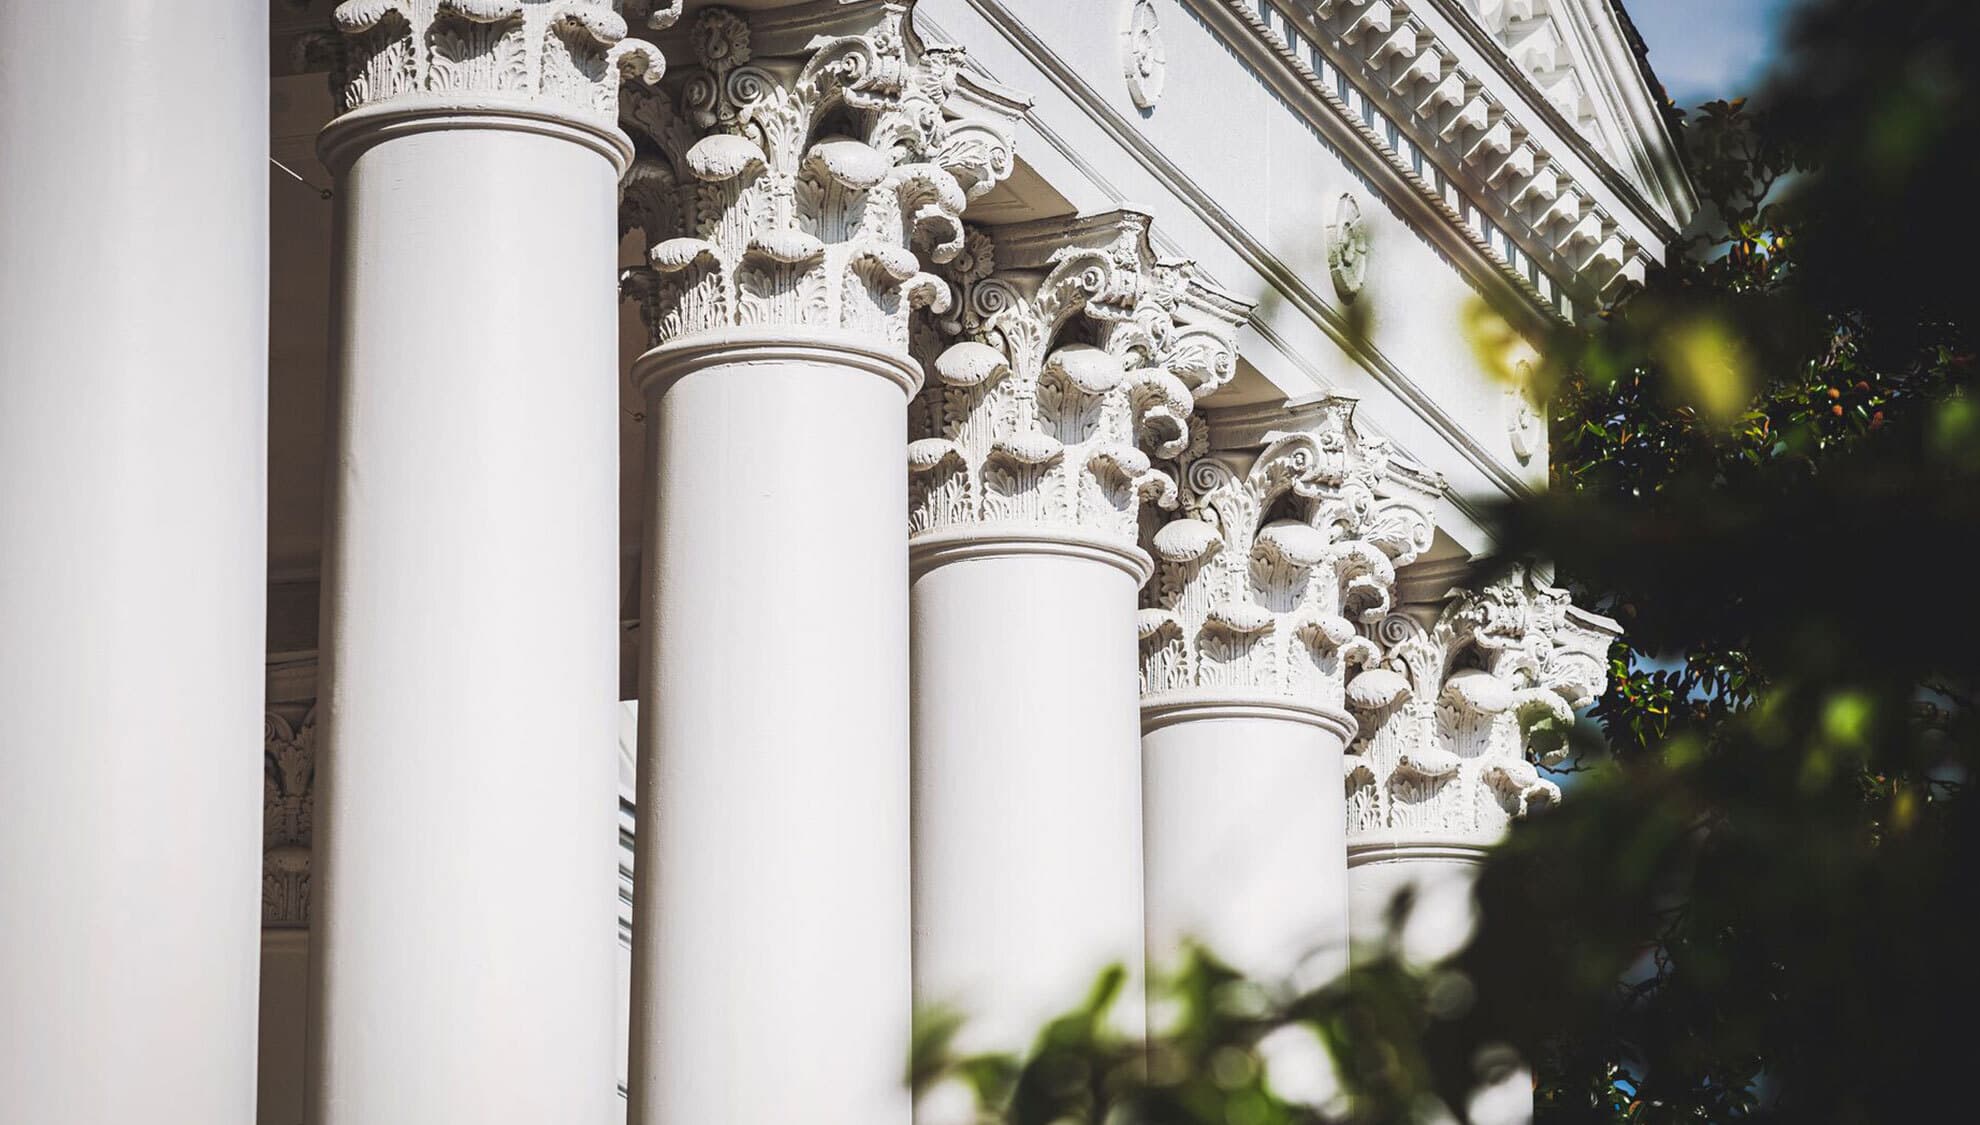 Large white pillars in the front of a building at the University of Maryland